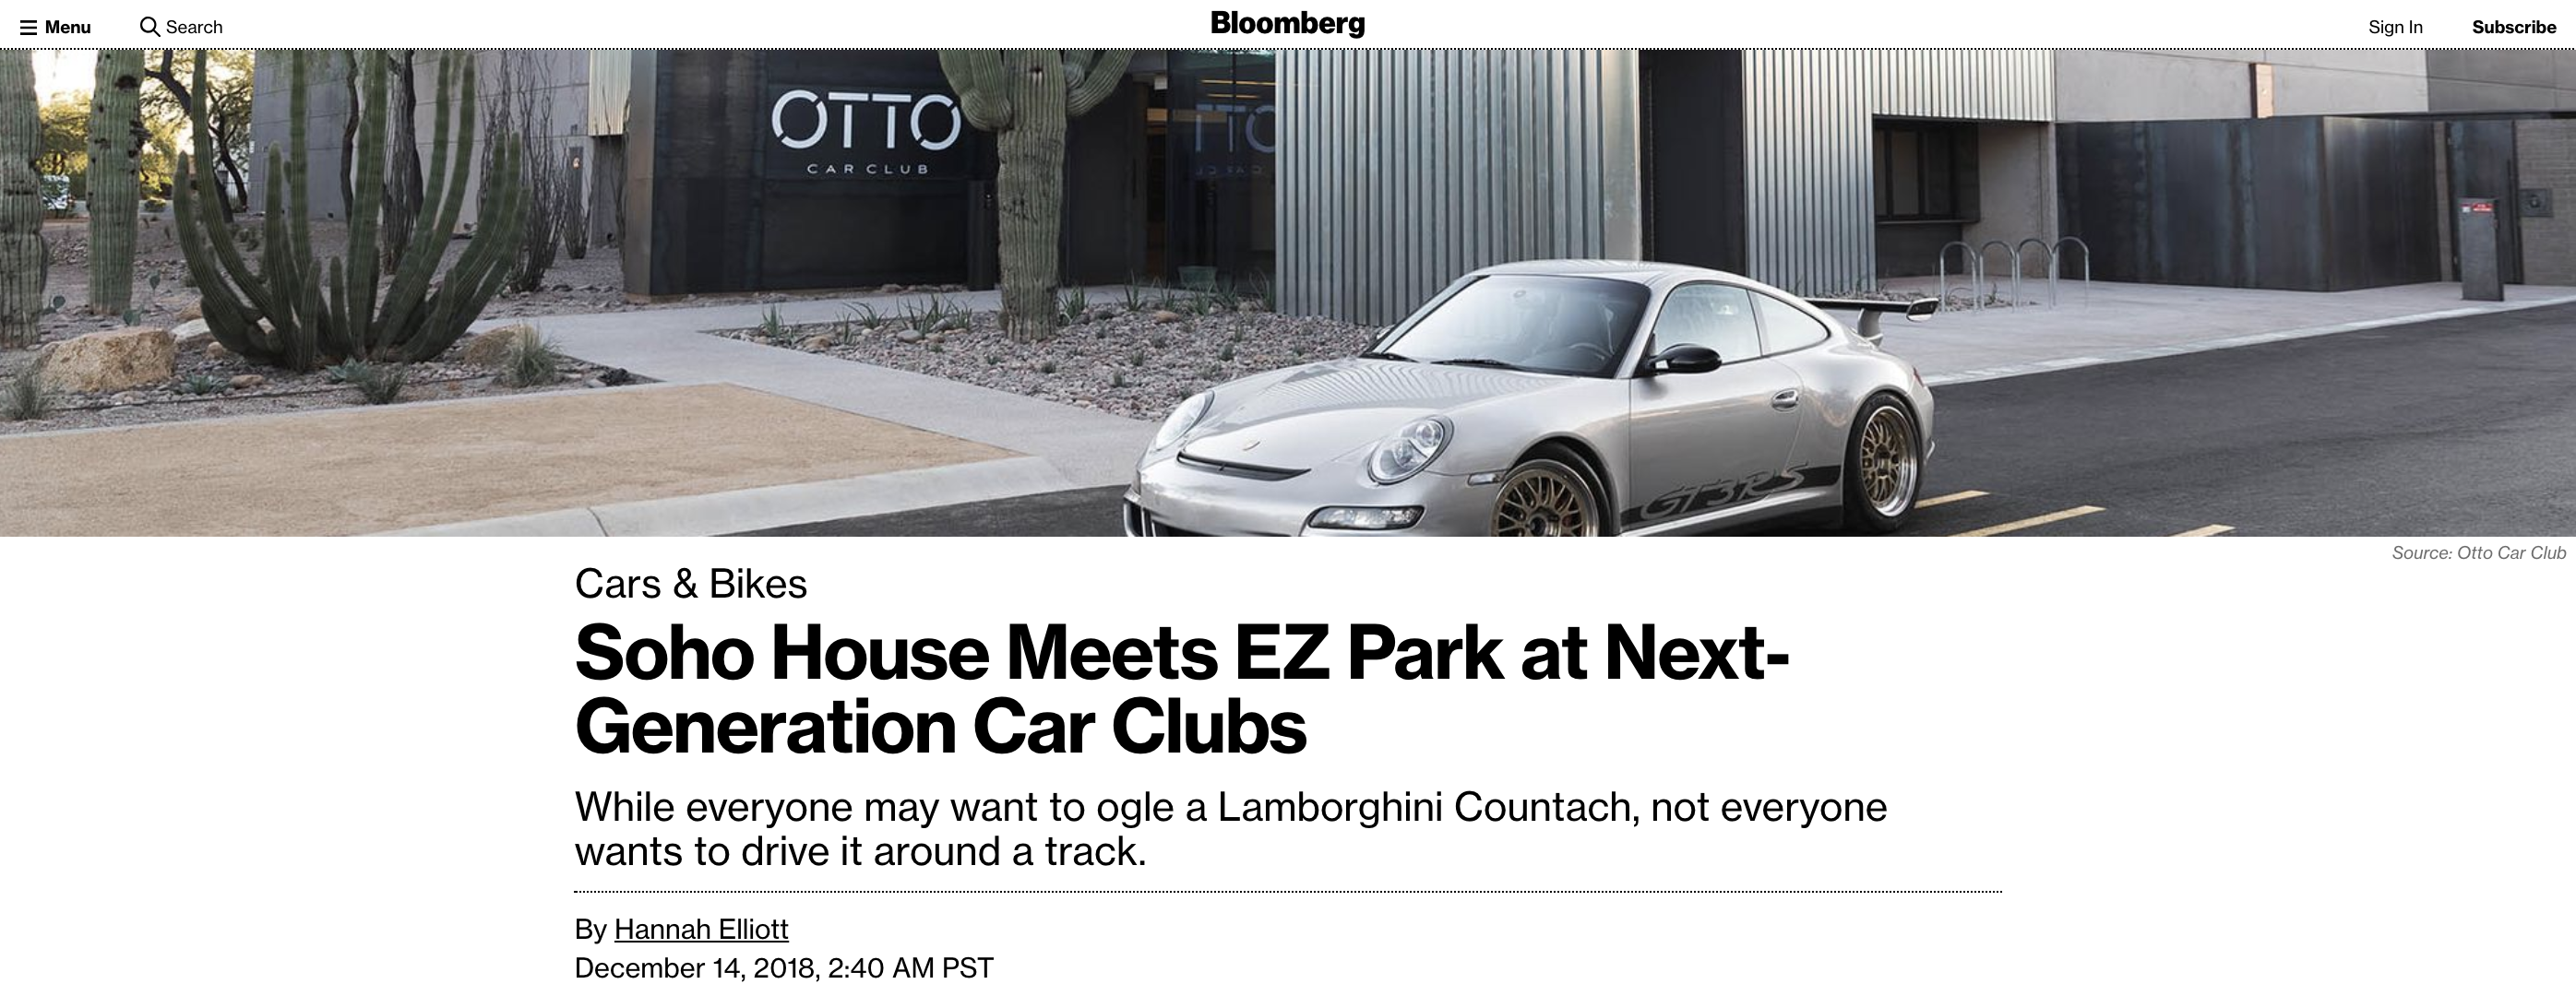 Bloomberg features Otto car club